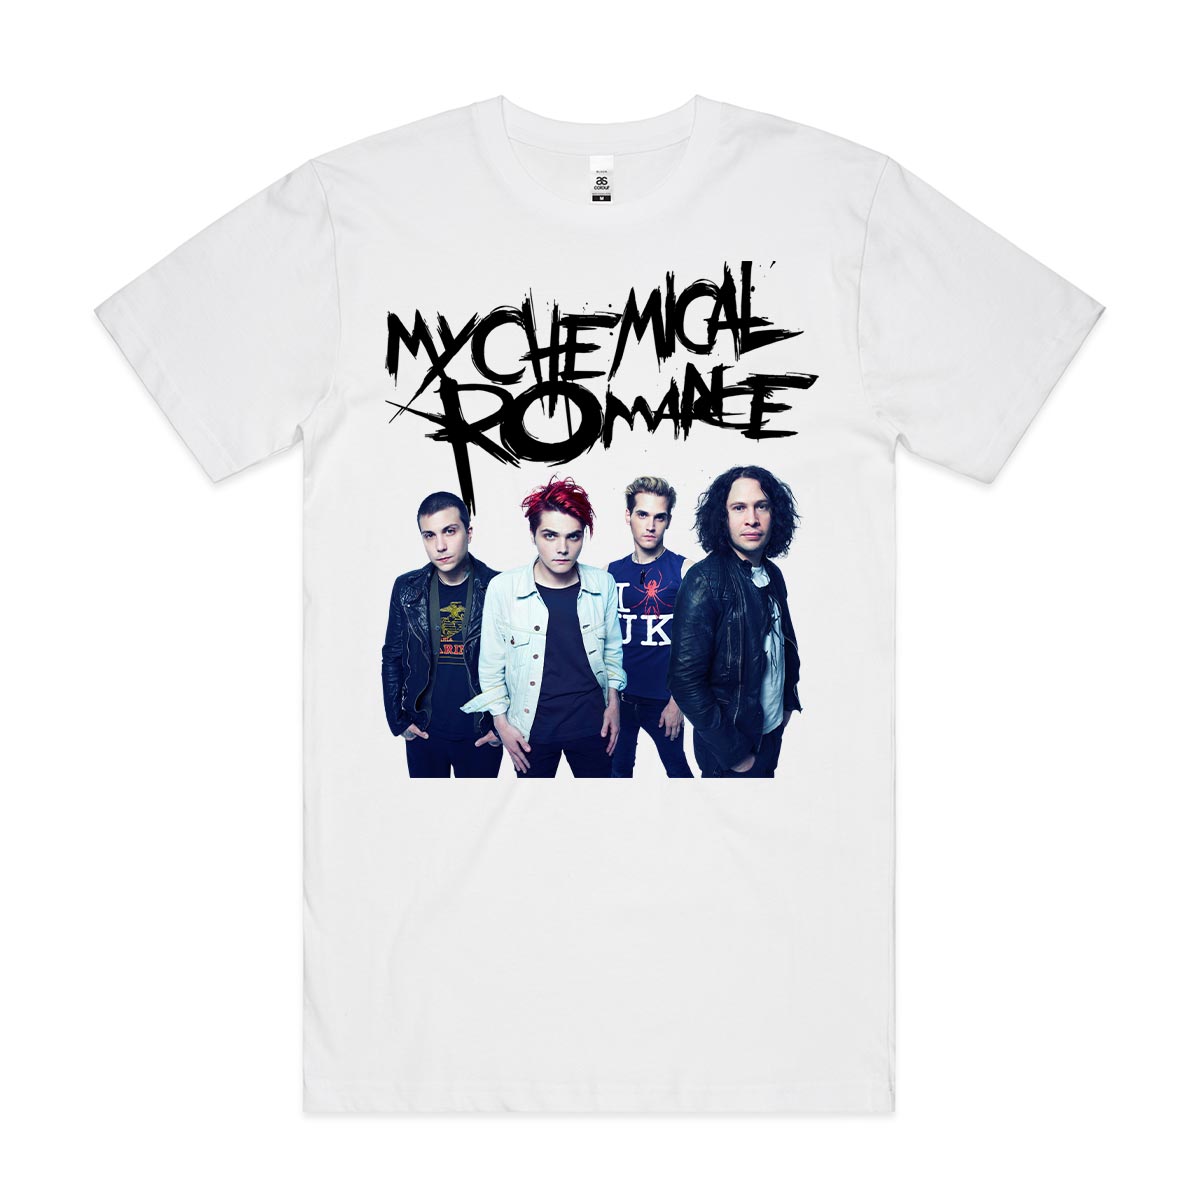 My Chemical Romance T-Shirt Band Family Tee Music Rock And Roll